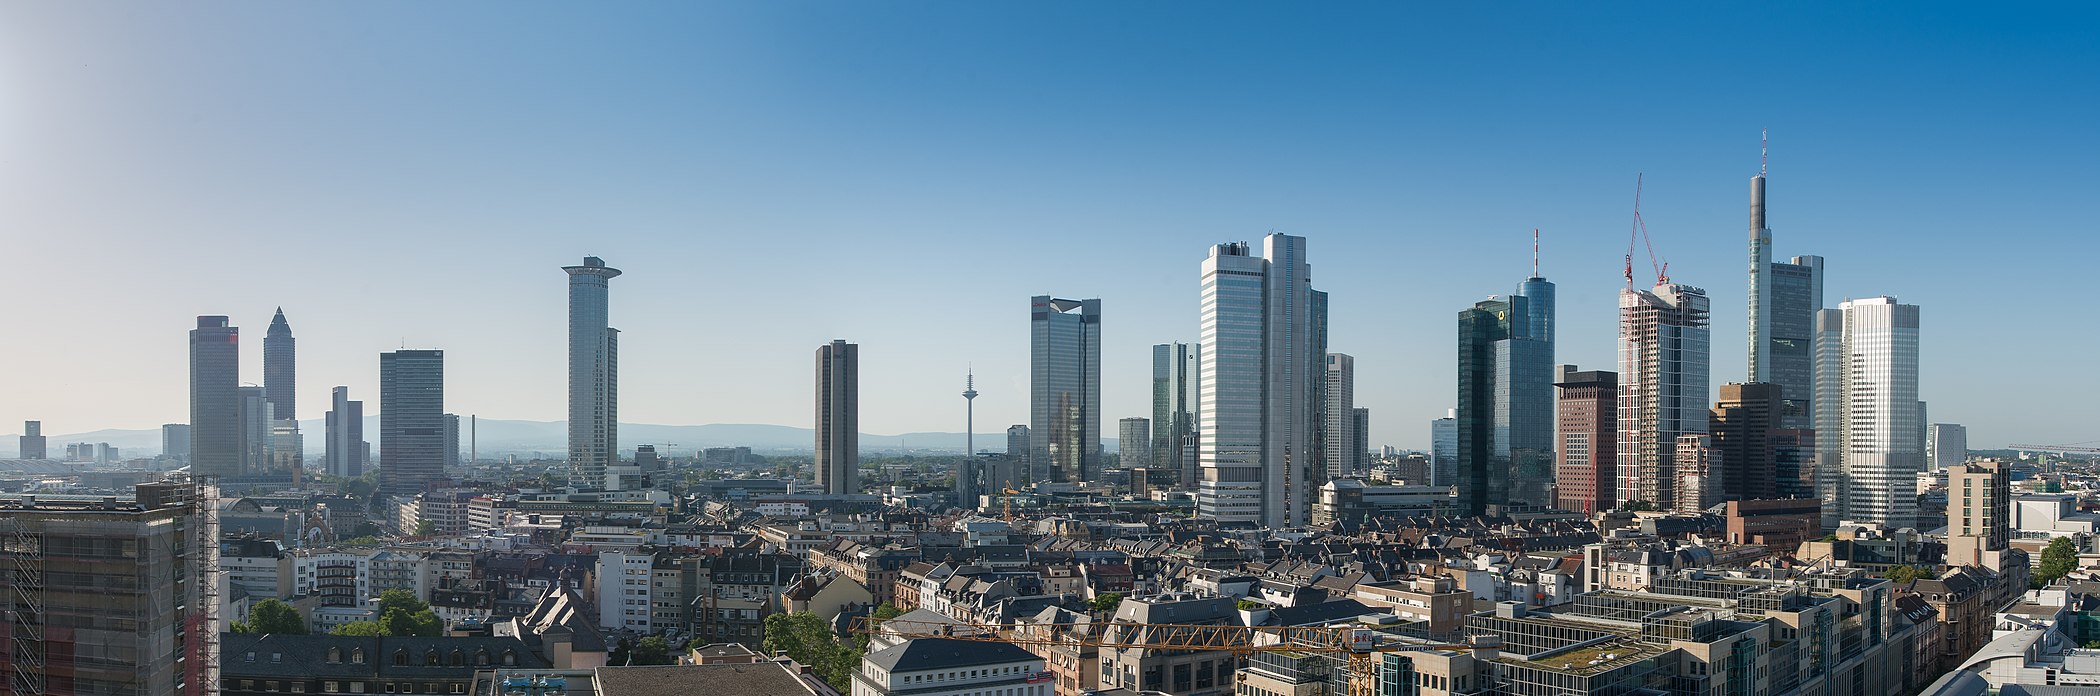 Frankfurt skyline in June 2013, view from south-west